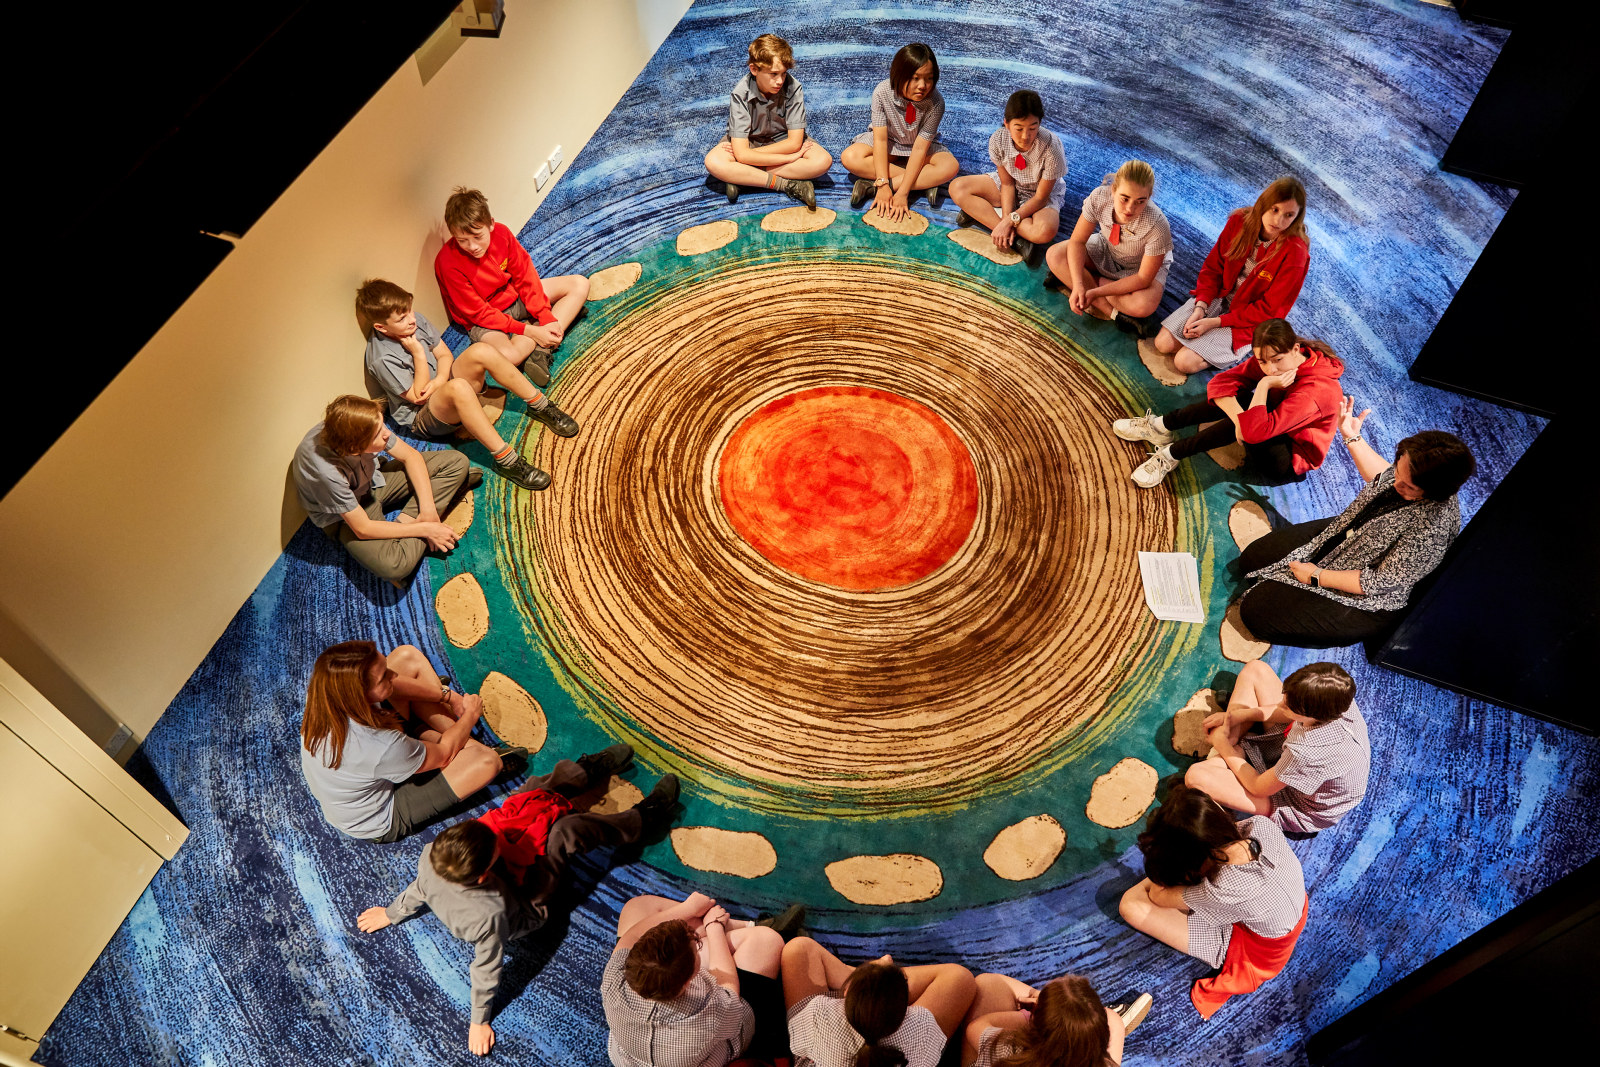 Students sitting around the Yarning Circle sharing stories as part of the Garuwanga Gurad (Stories that belong to Country) program at the Museum of Sydney